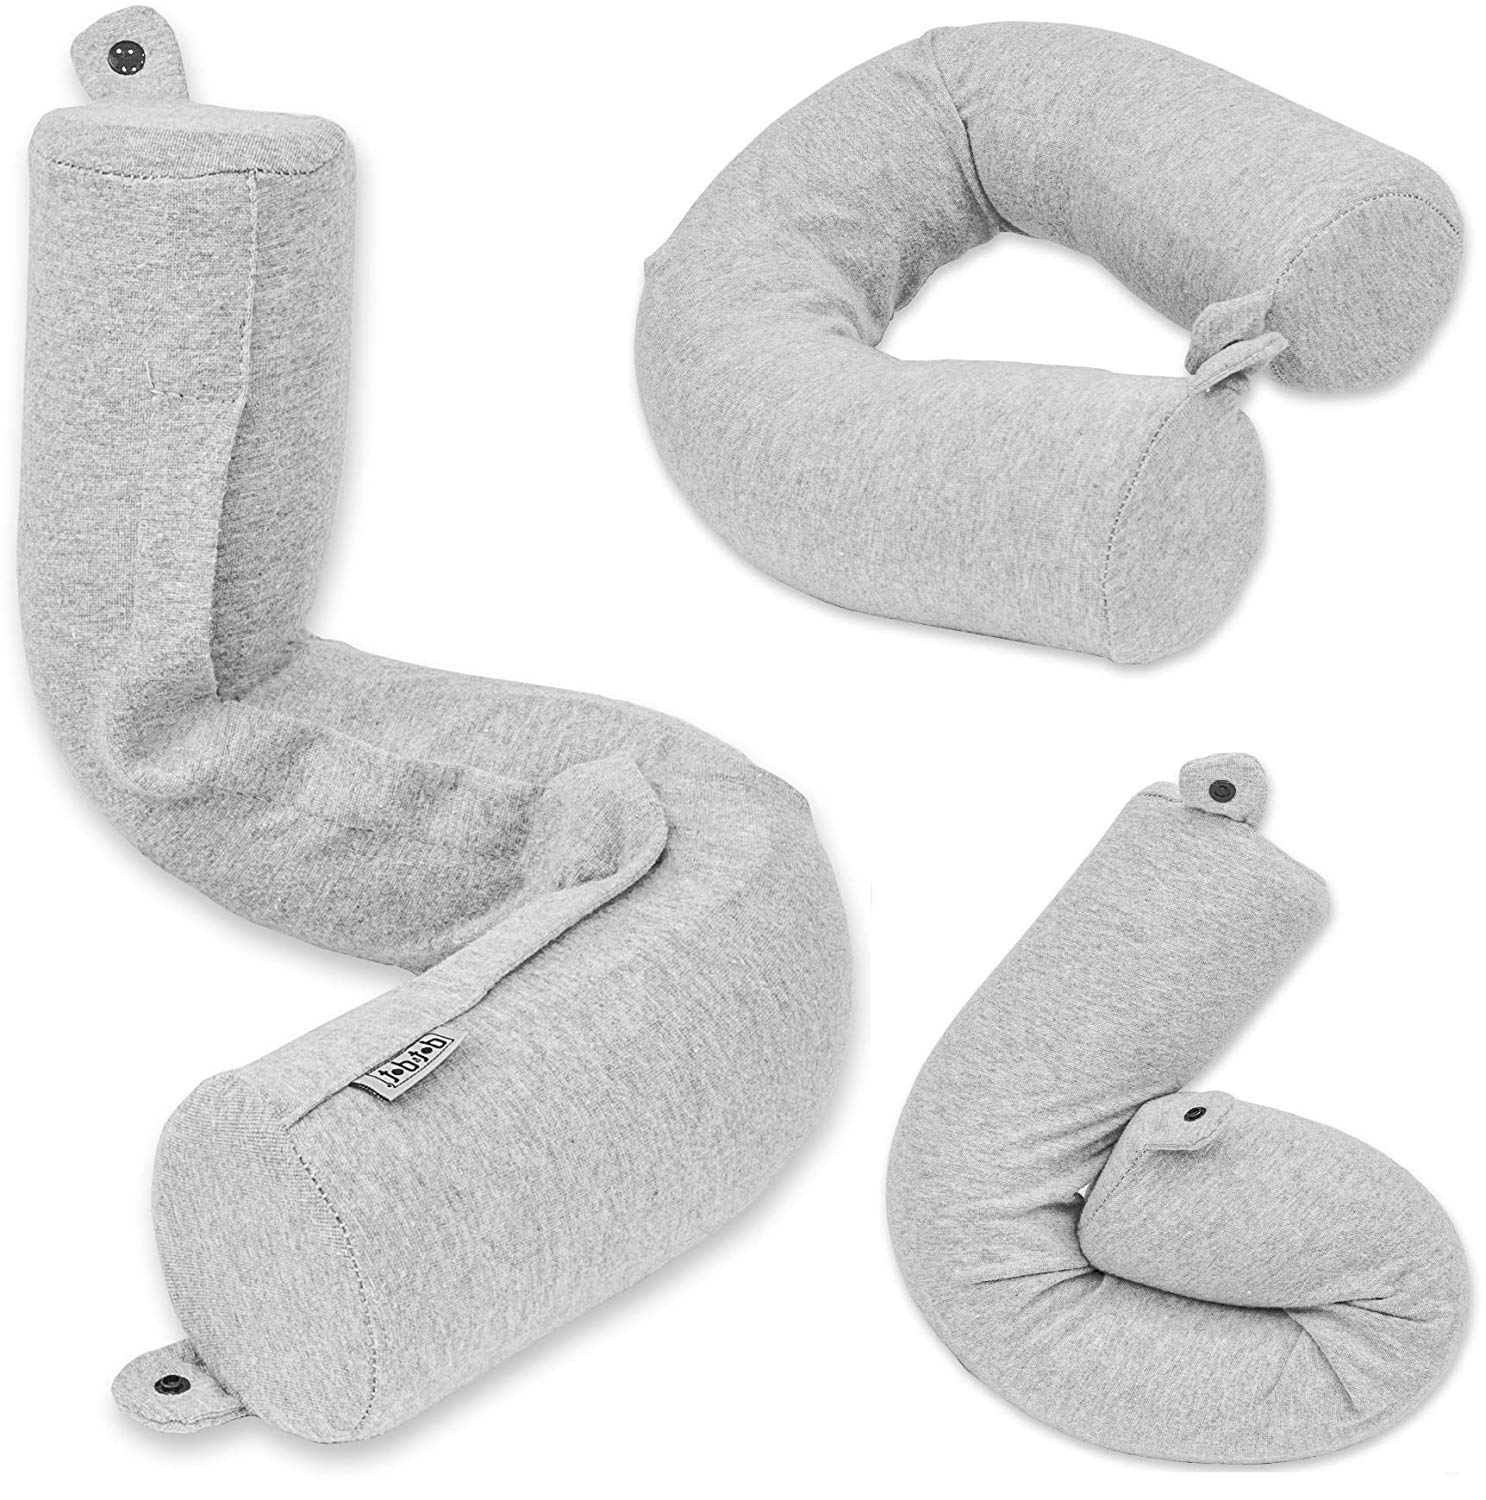 Twist Memory Foam Travel Pillow for Neck, Chin, Lumbar and Leg Support 